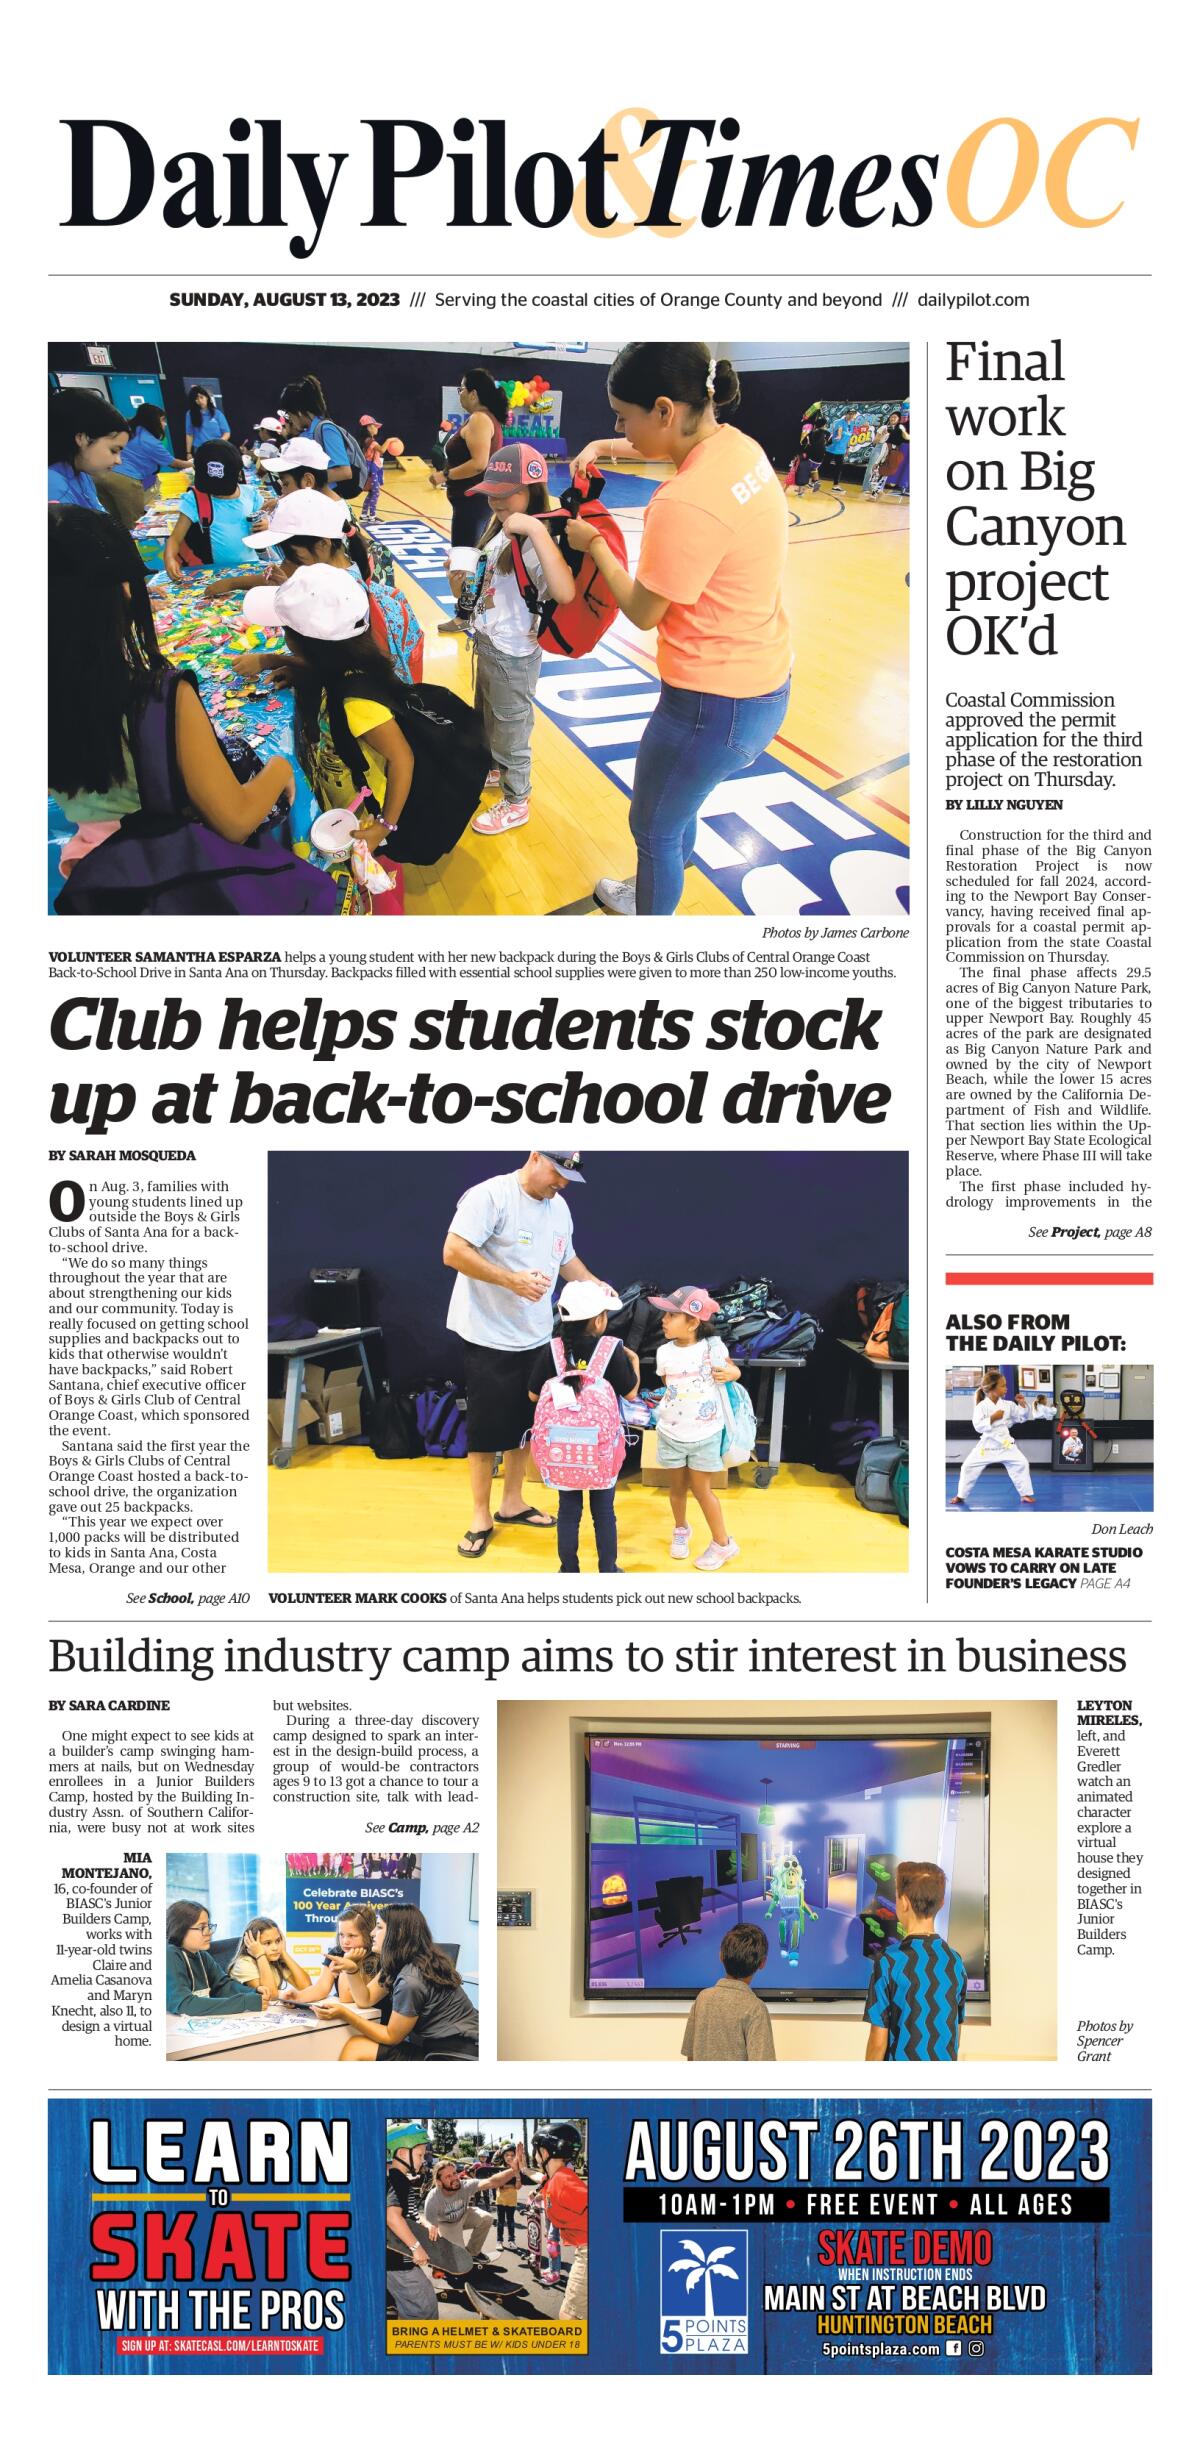 Front page of Daily Pilot and TimesOC e-newspaper for Sunday, Aug. 13, 2023.